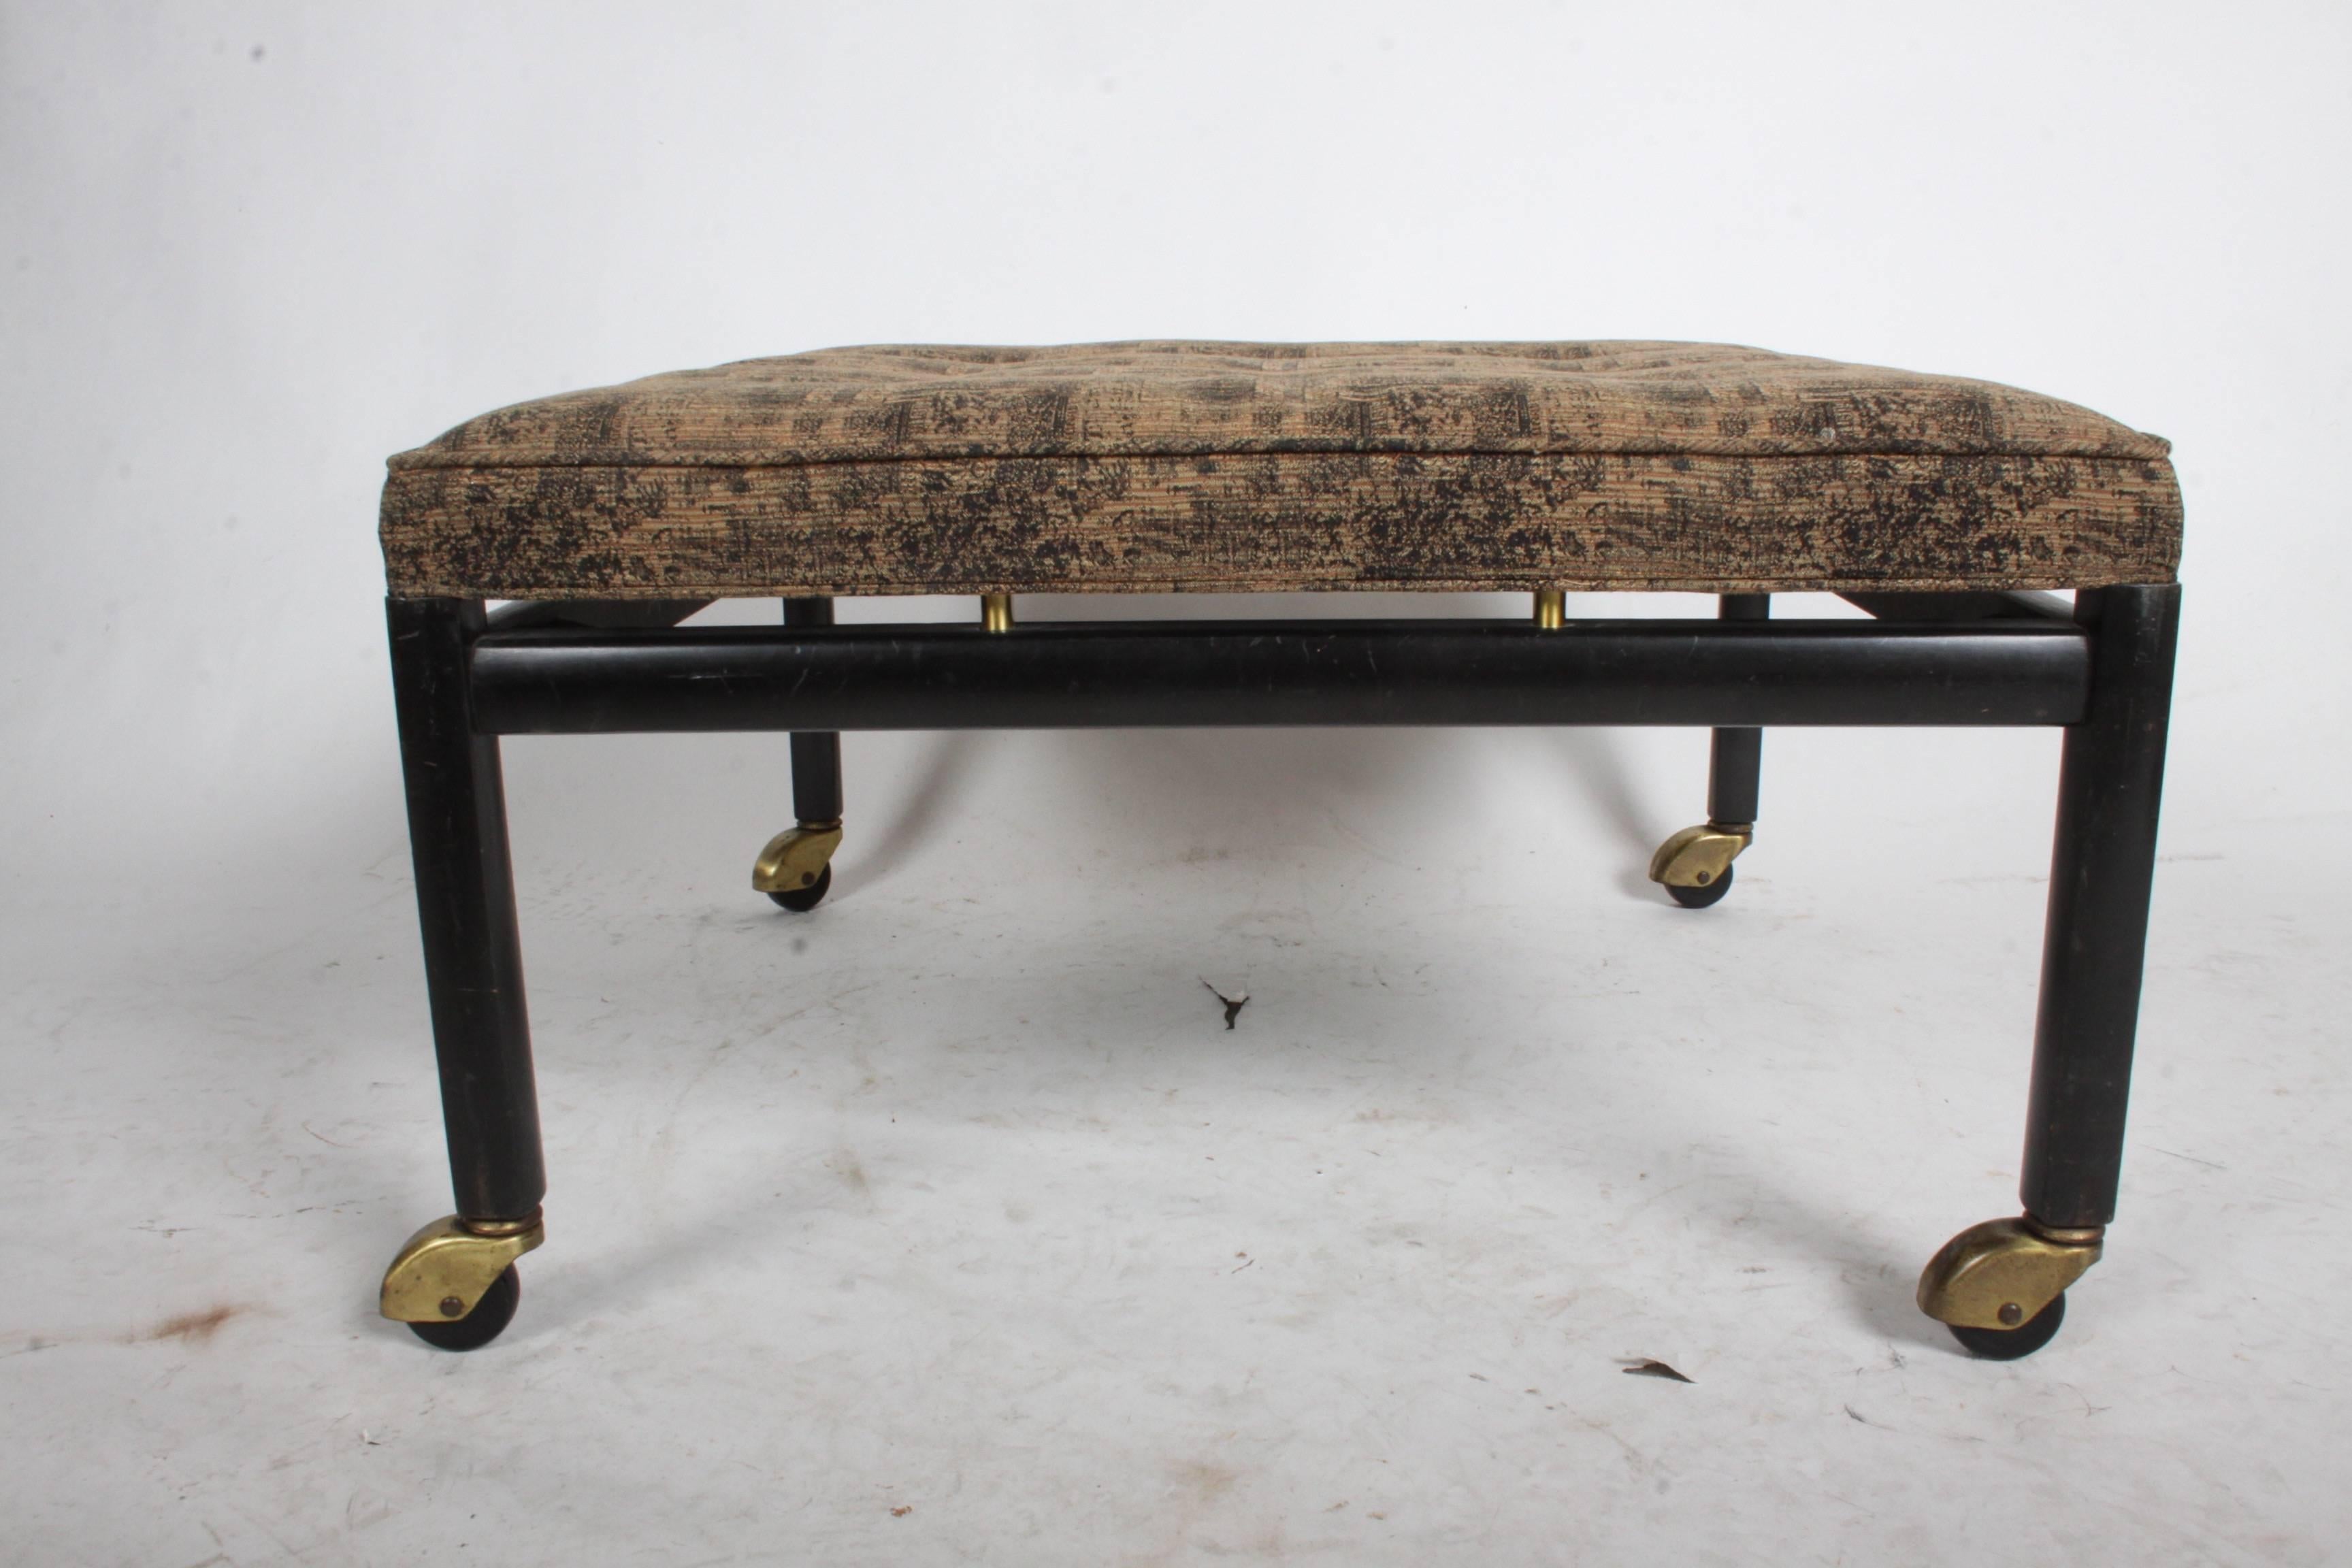 Vintage Michael Taylor for Baker Furniture Co. ottoman with brass castors. Original ebonized finish and upholstery, seat raised on brass cylinders. Label.